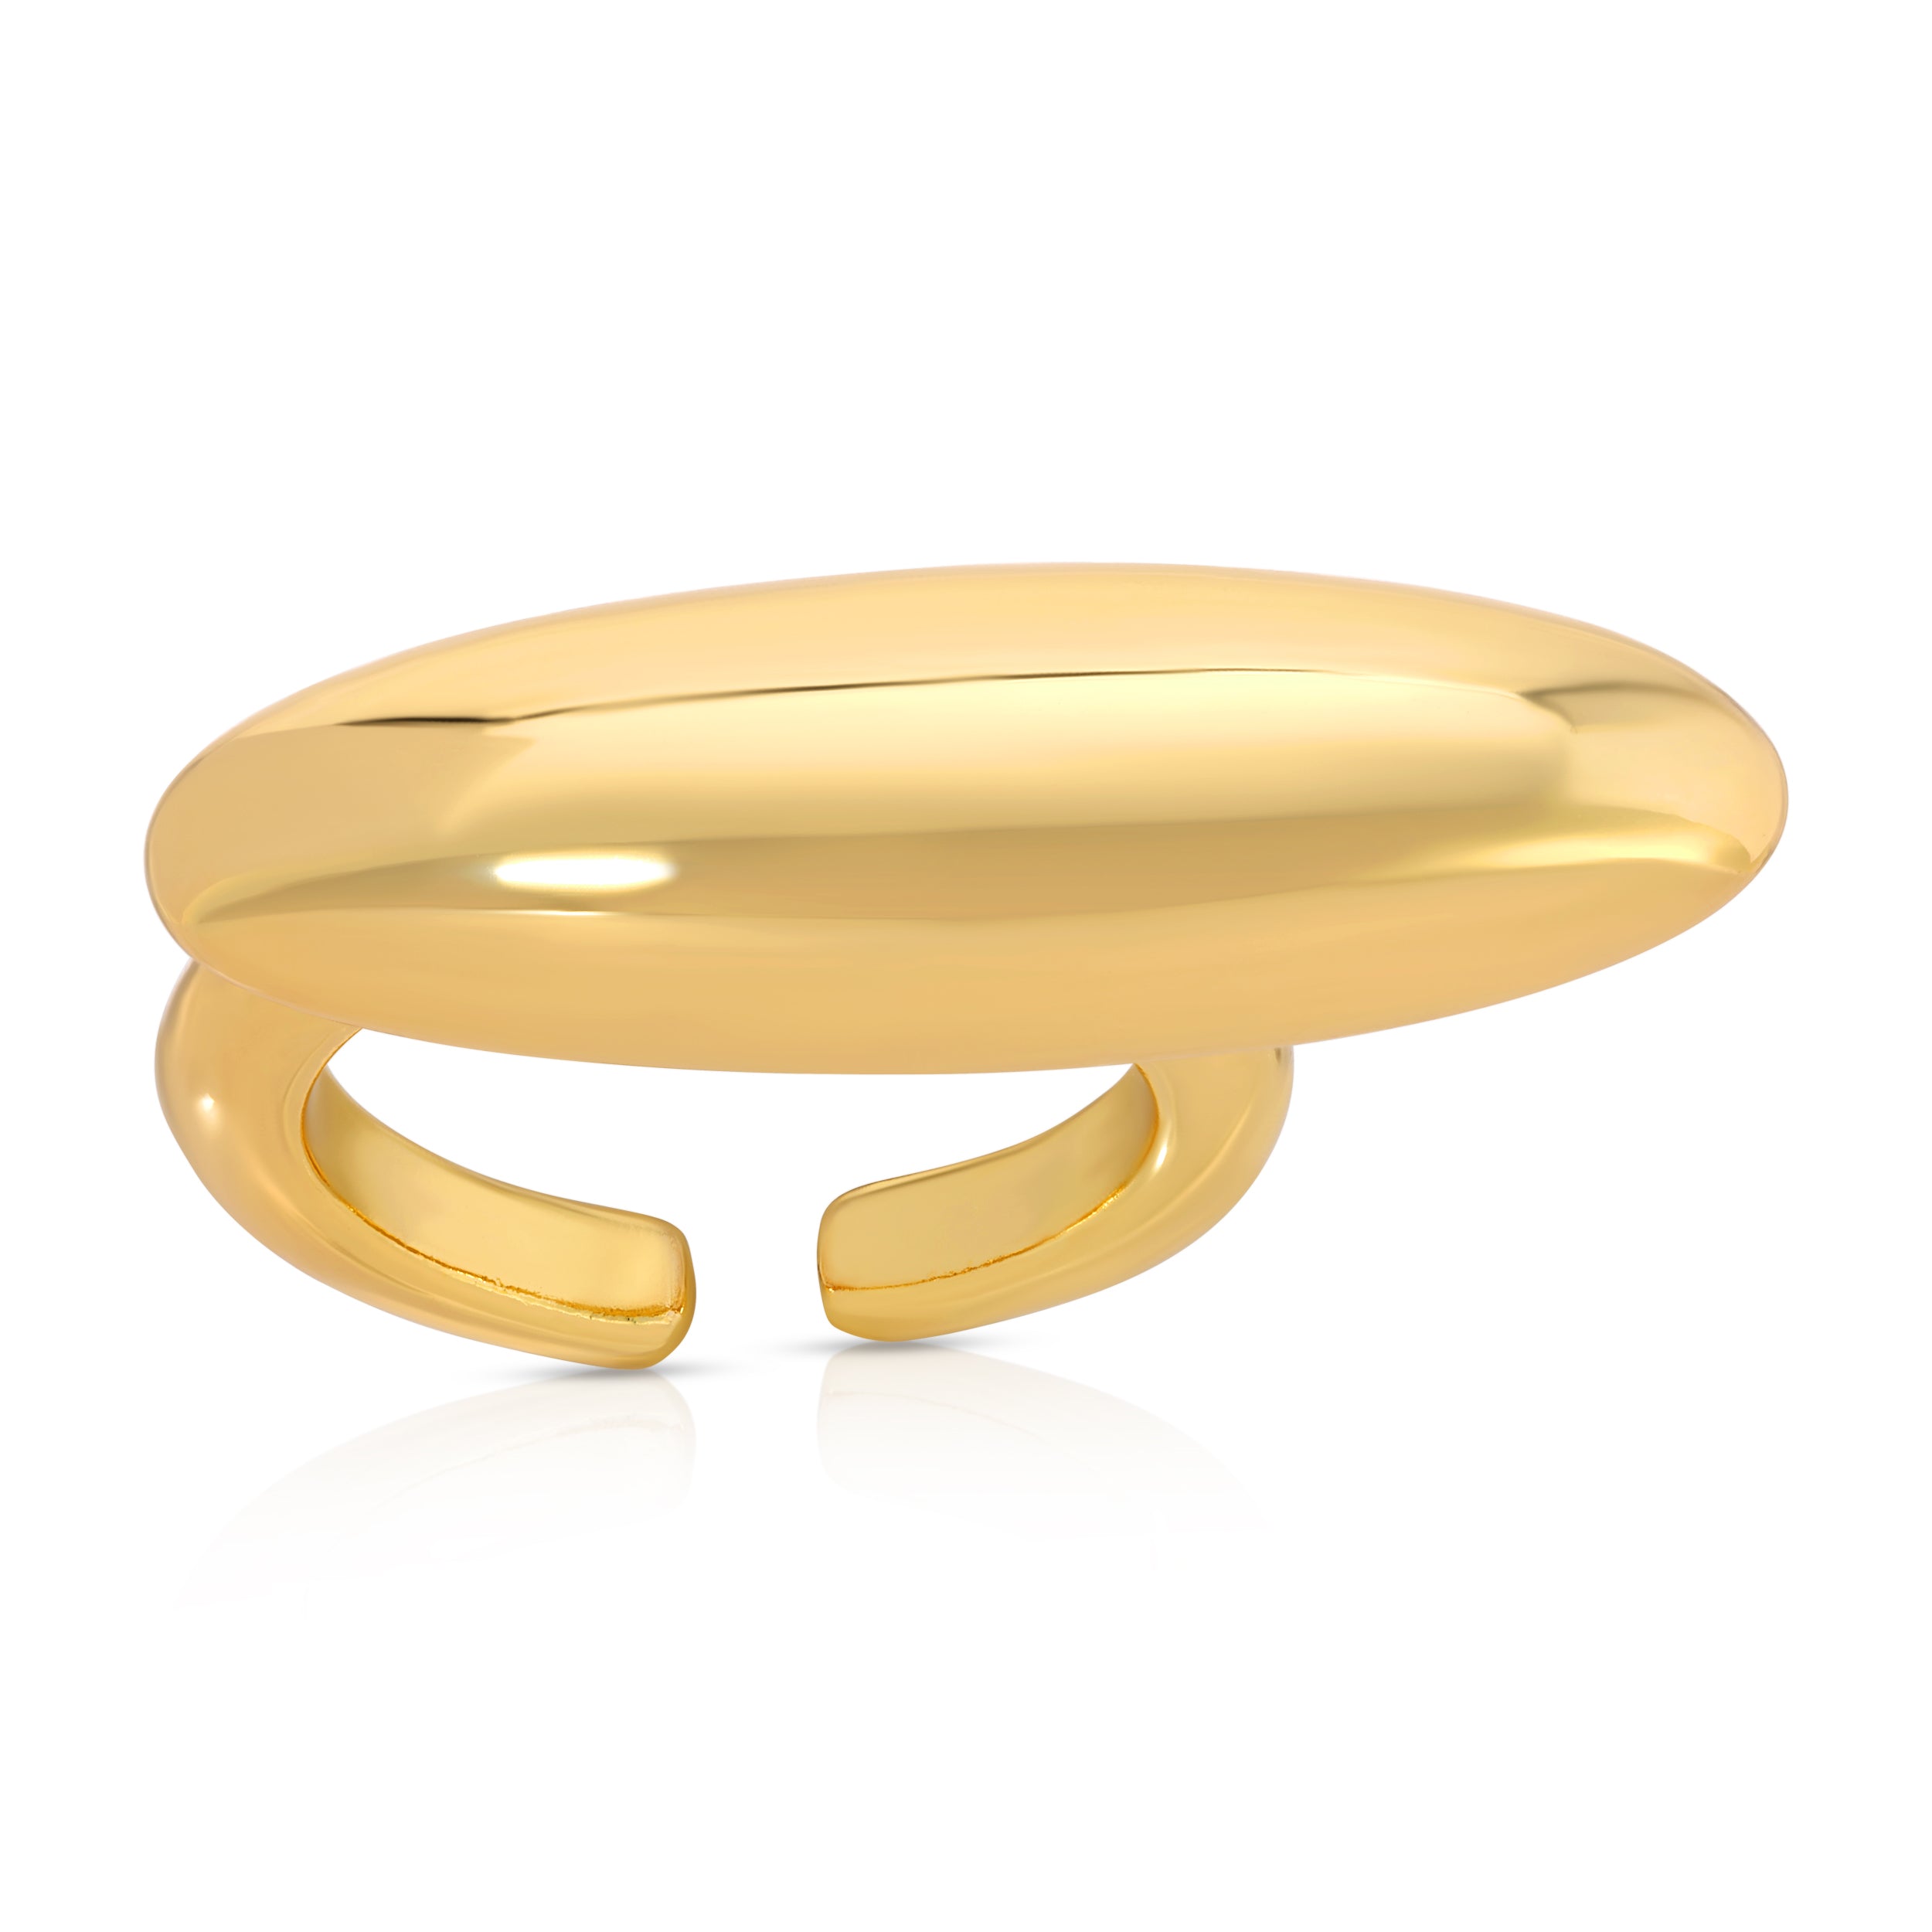 The Chouette Ring